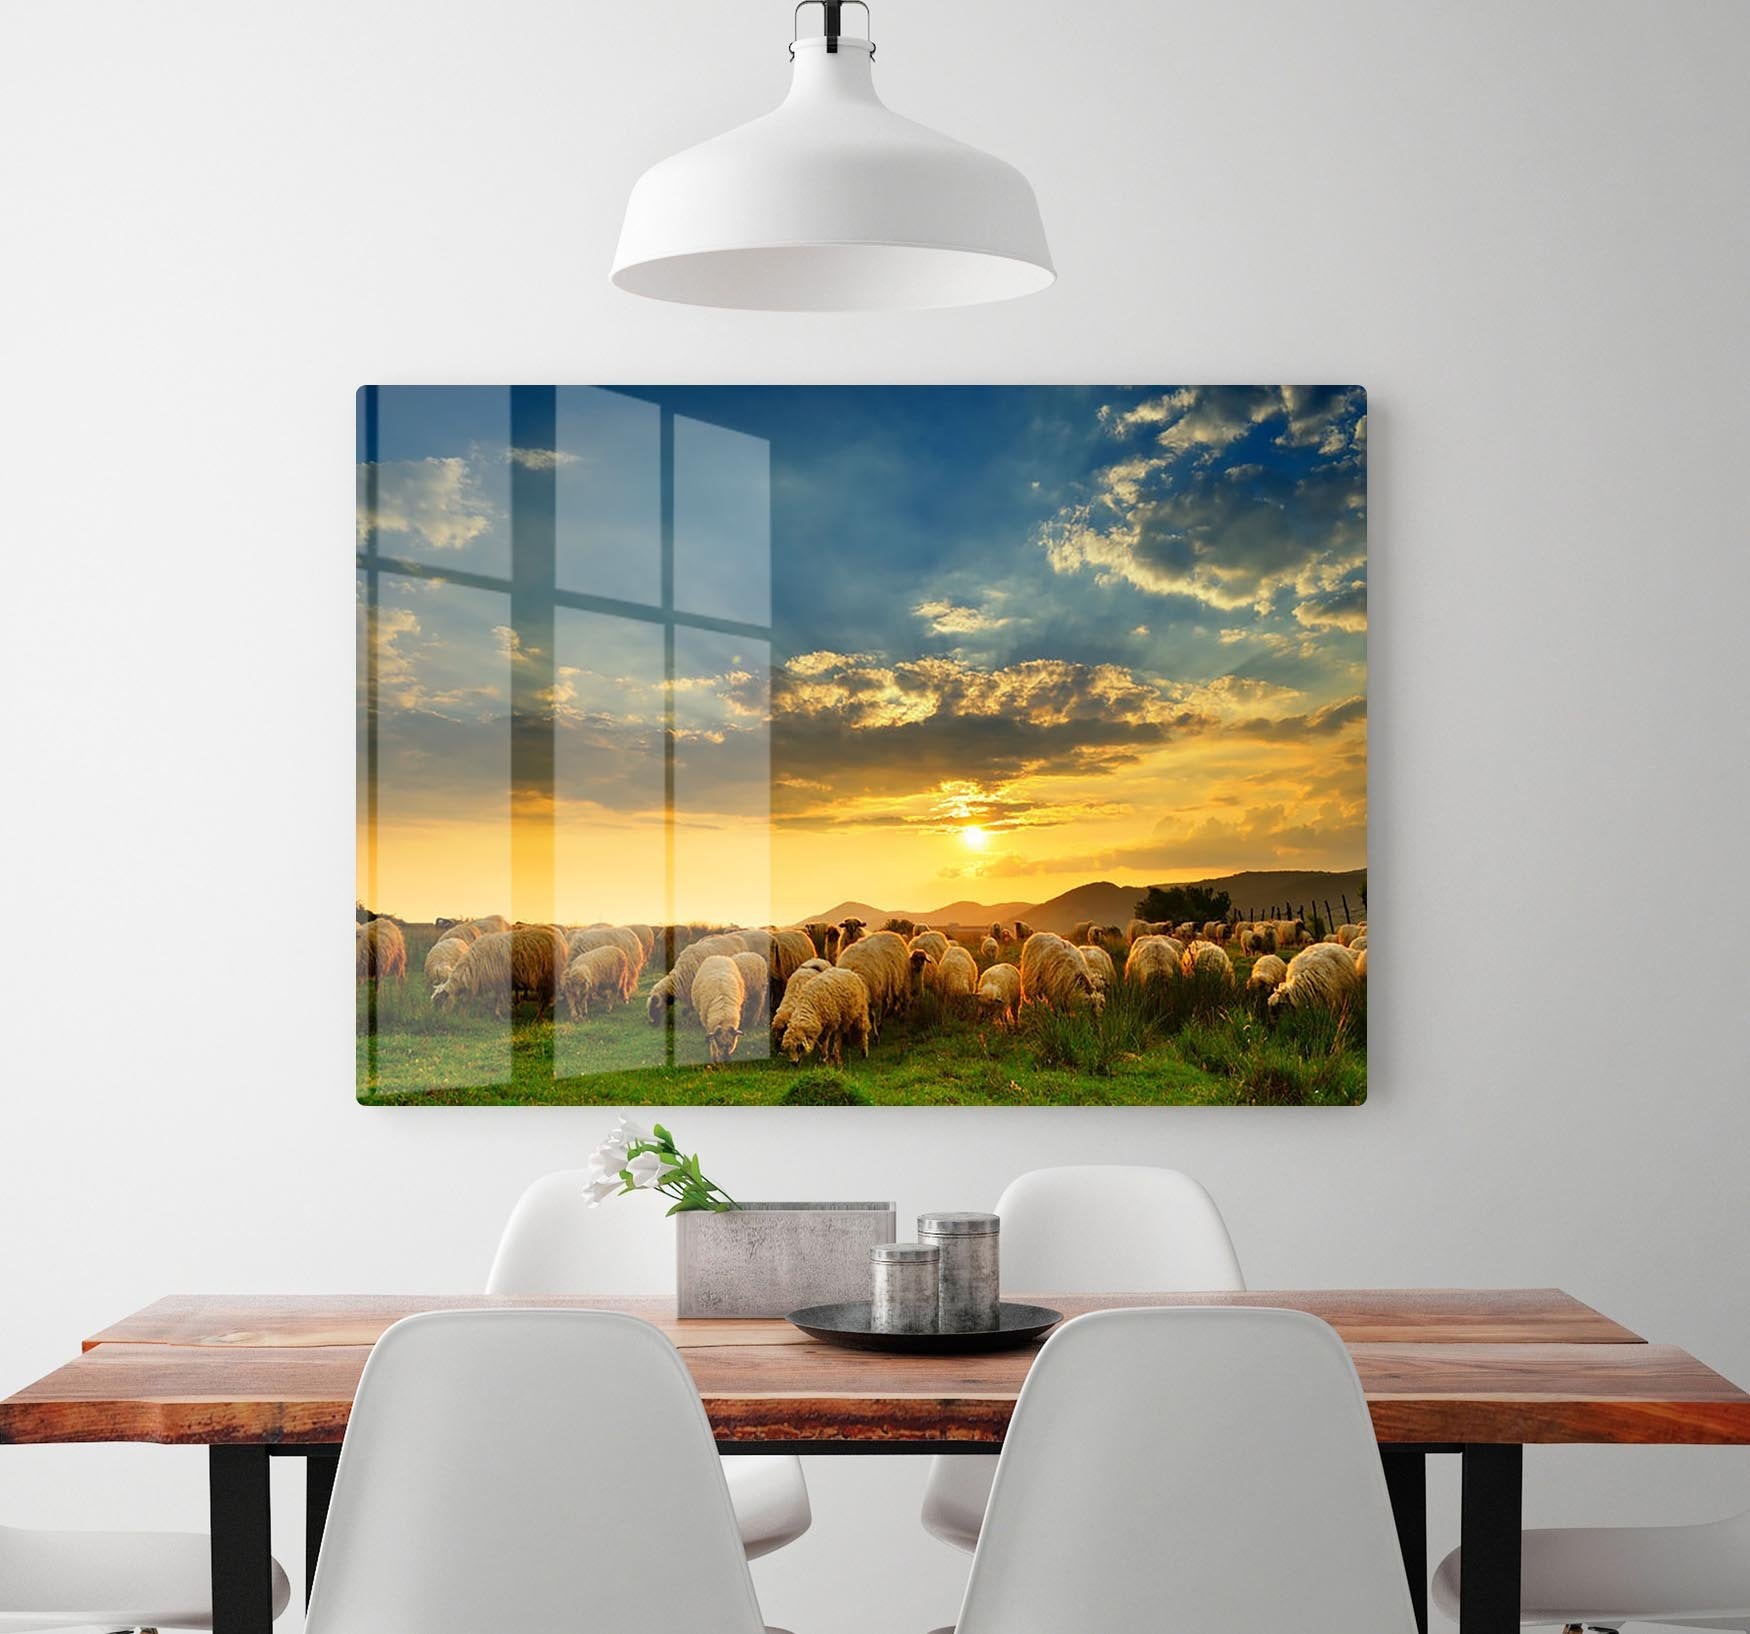 Flock of sheep grazing in a hill at sunset HD Metal Print - Canvas Art Rocks - 2